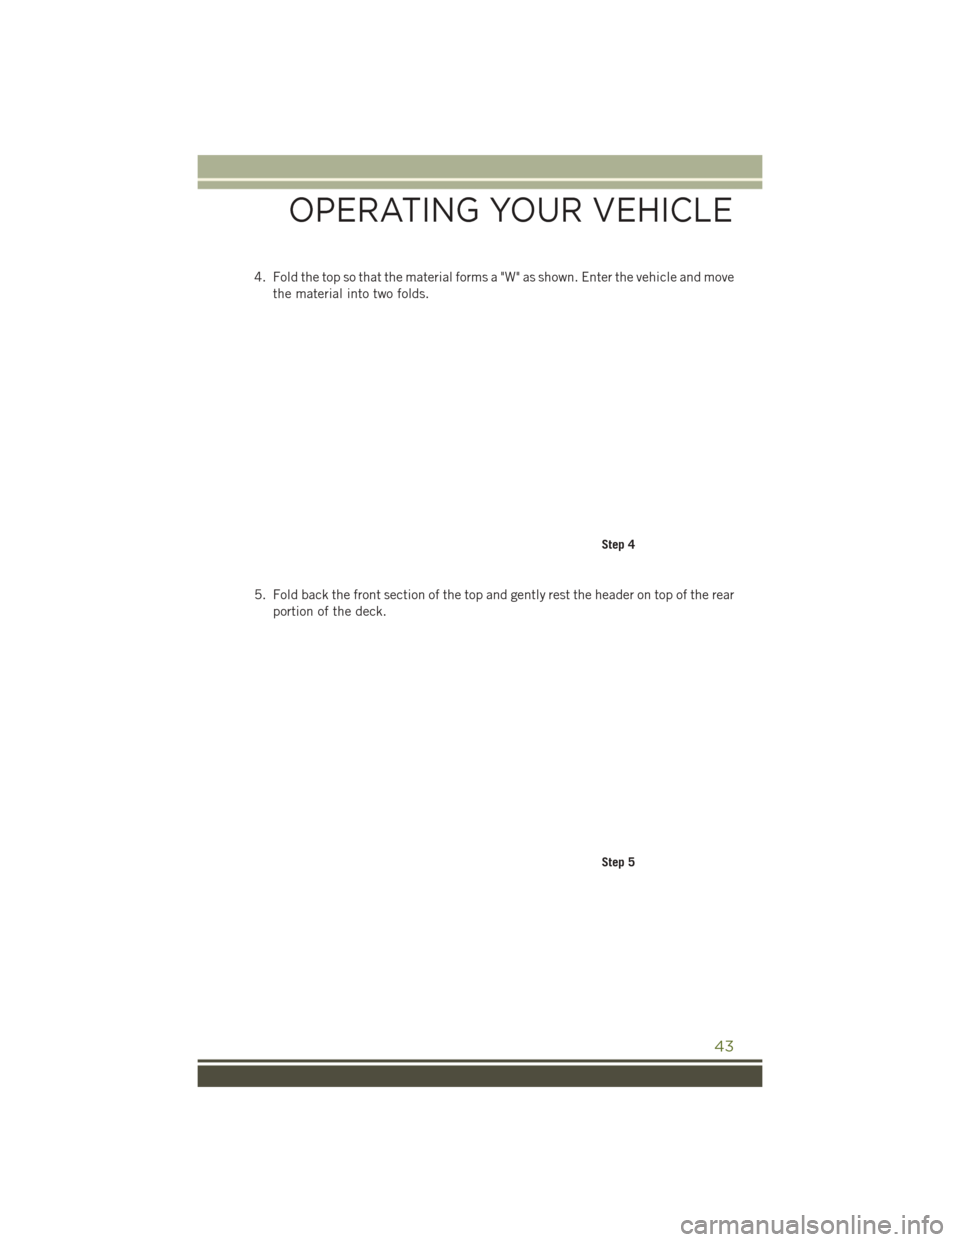 JEEP WRANGLER 2016 JK / 3.G Service Manual 4. Fold the top so that the material forms a "W" as shown. Enter the vehicle and movethe material into two folds.
5. Fold back the front section of the top and gently rest the header on top of the rea